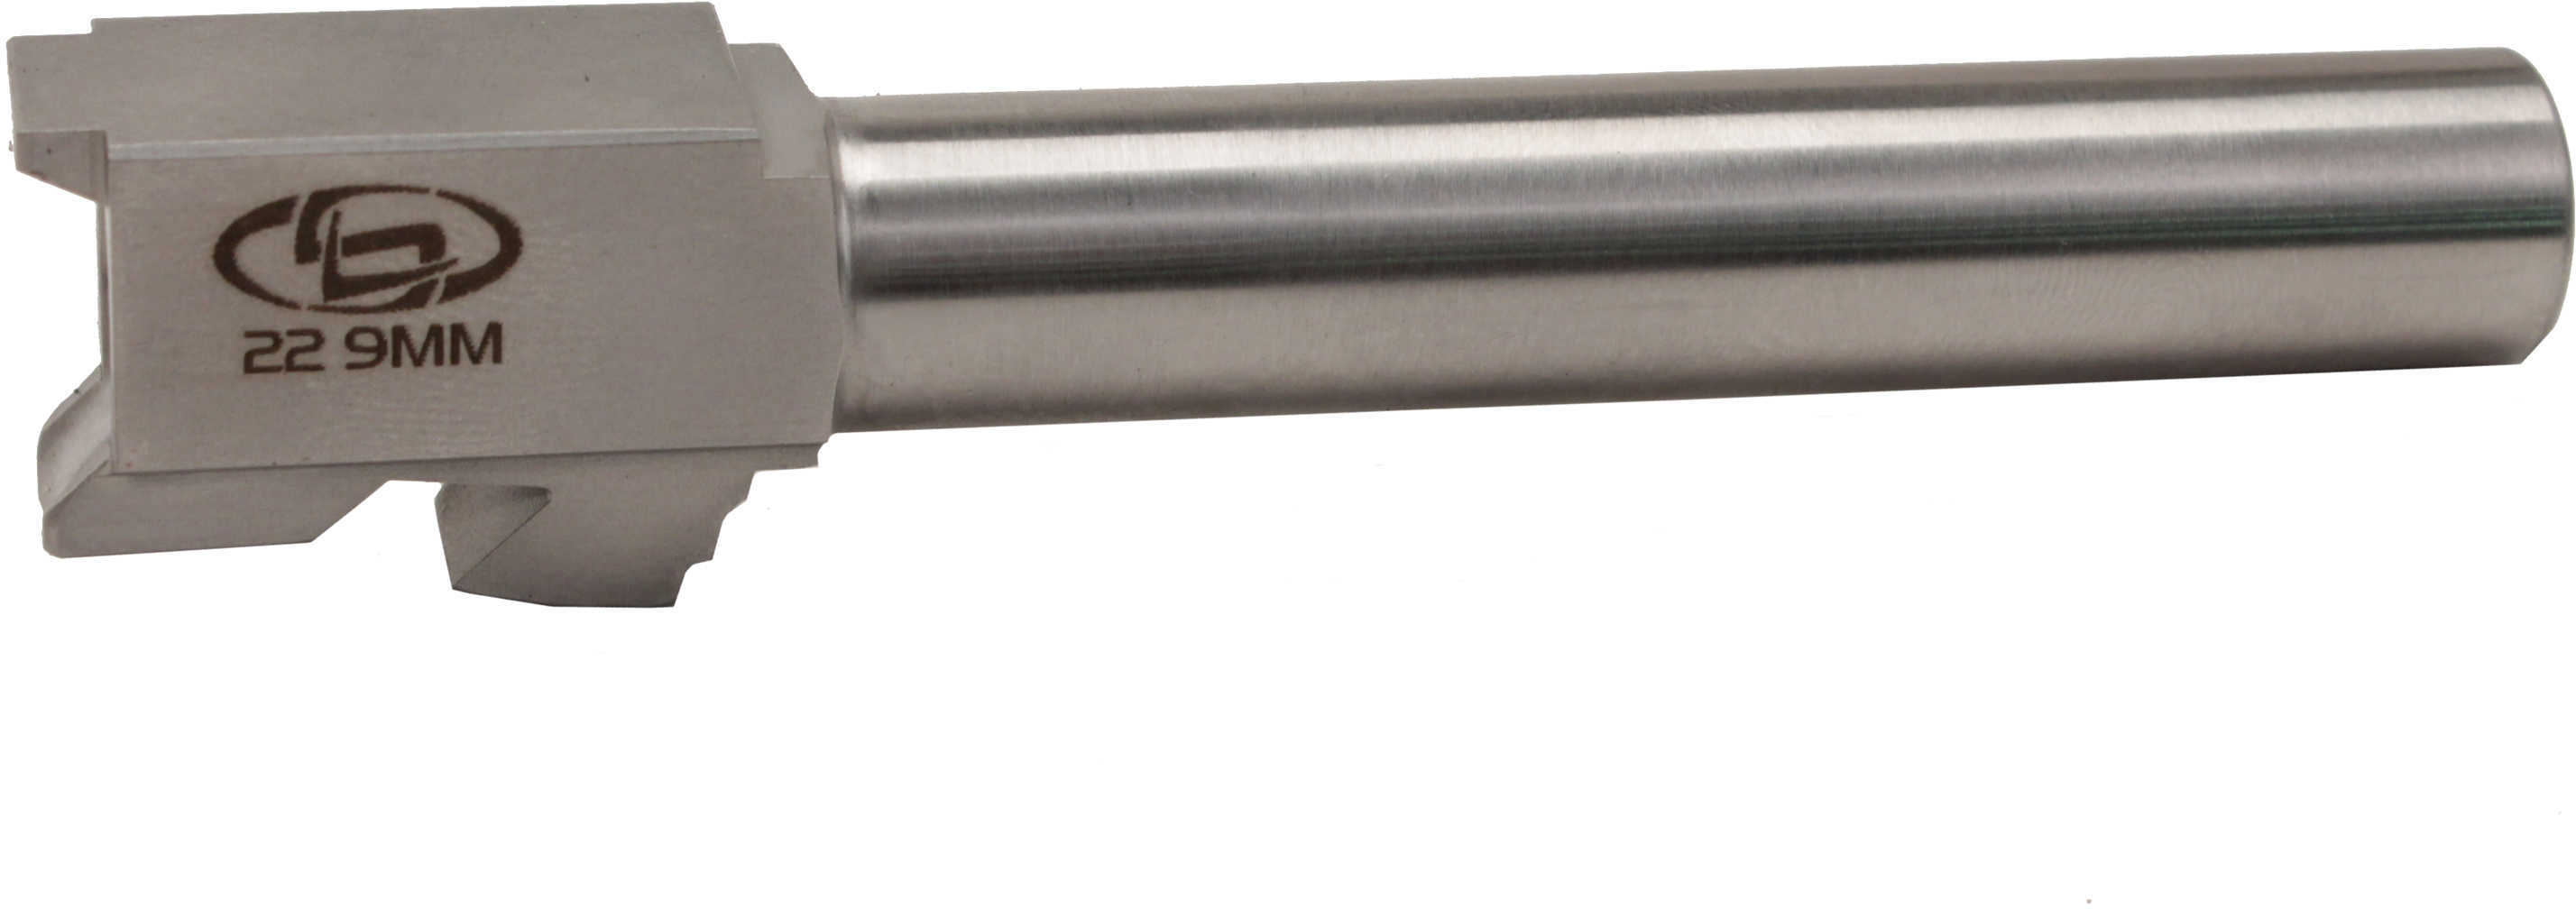 Storm Lake Barrels 9MM 4.49" Fits Glock OEM 22 Stainless Finish Conversion Converts 40 S&W To